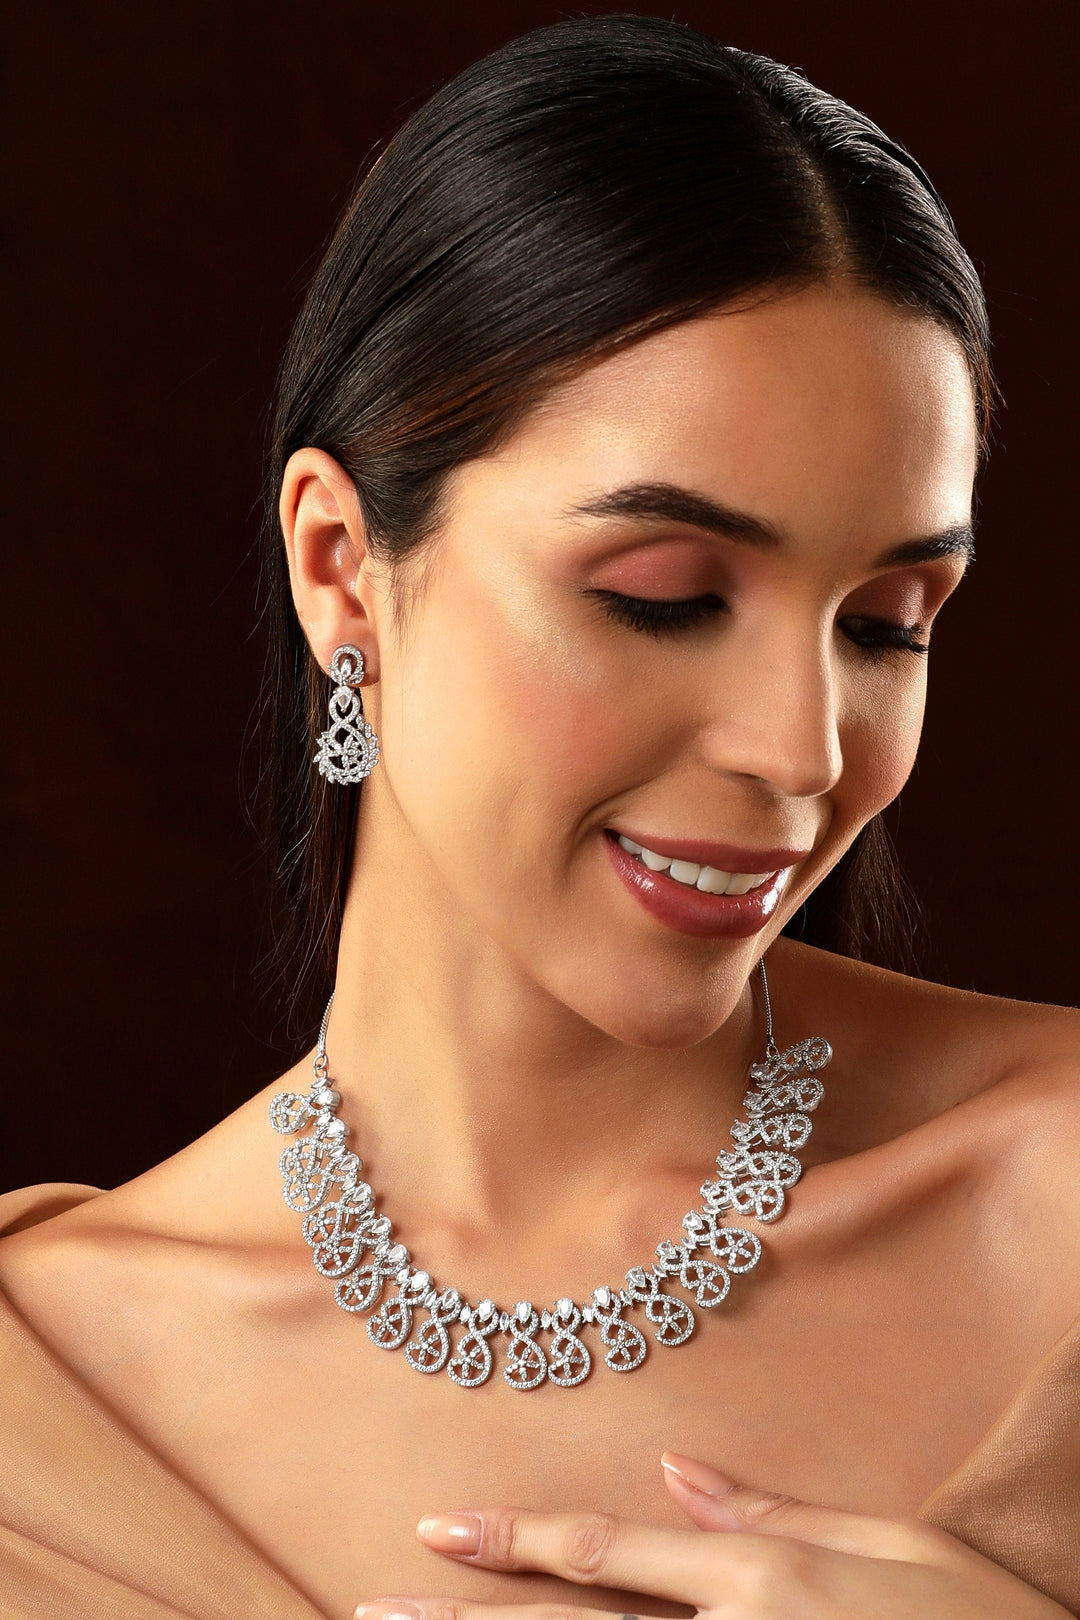 American Diamond Pink Bridal Necklace Set-silver Plated Cz 